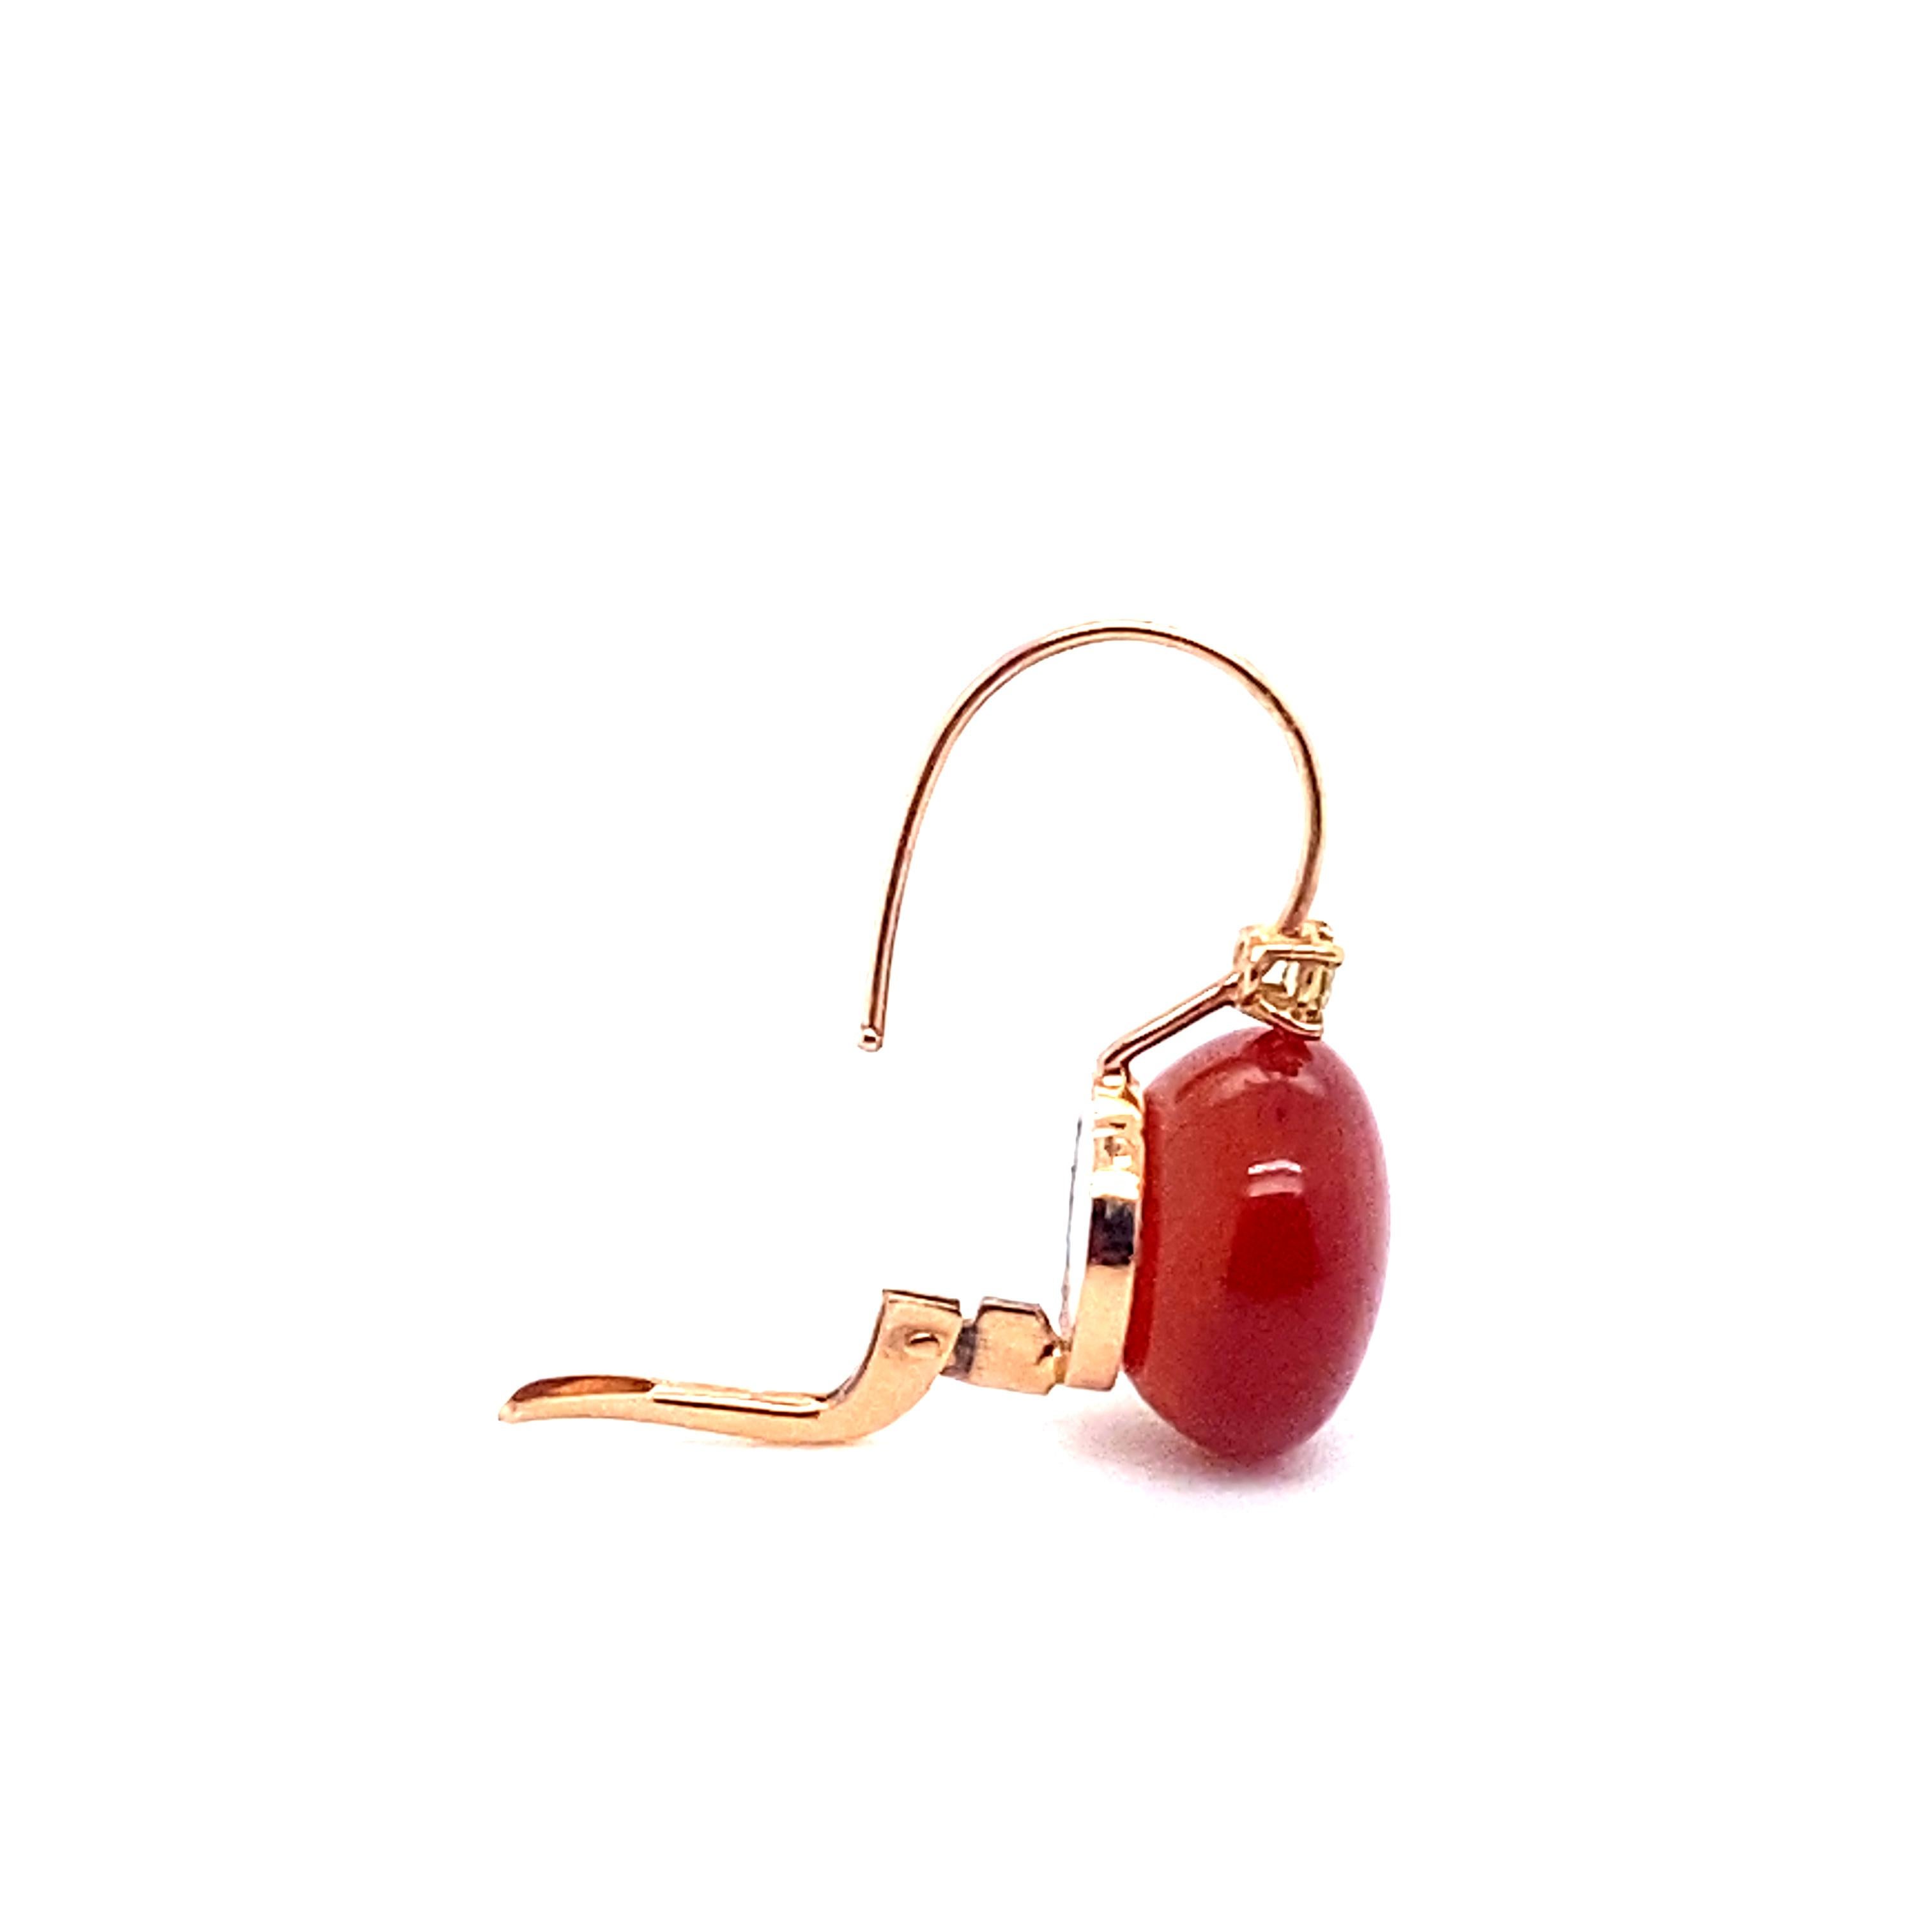 Welcome to our showcase page, where we're delighted to present this sumptuous pair of 18-carat gold earrings, topped with a red agate set with cognac diamonds, and adorned with a delicate mother-of-pearl leaf, an elegant and natural combination that